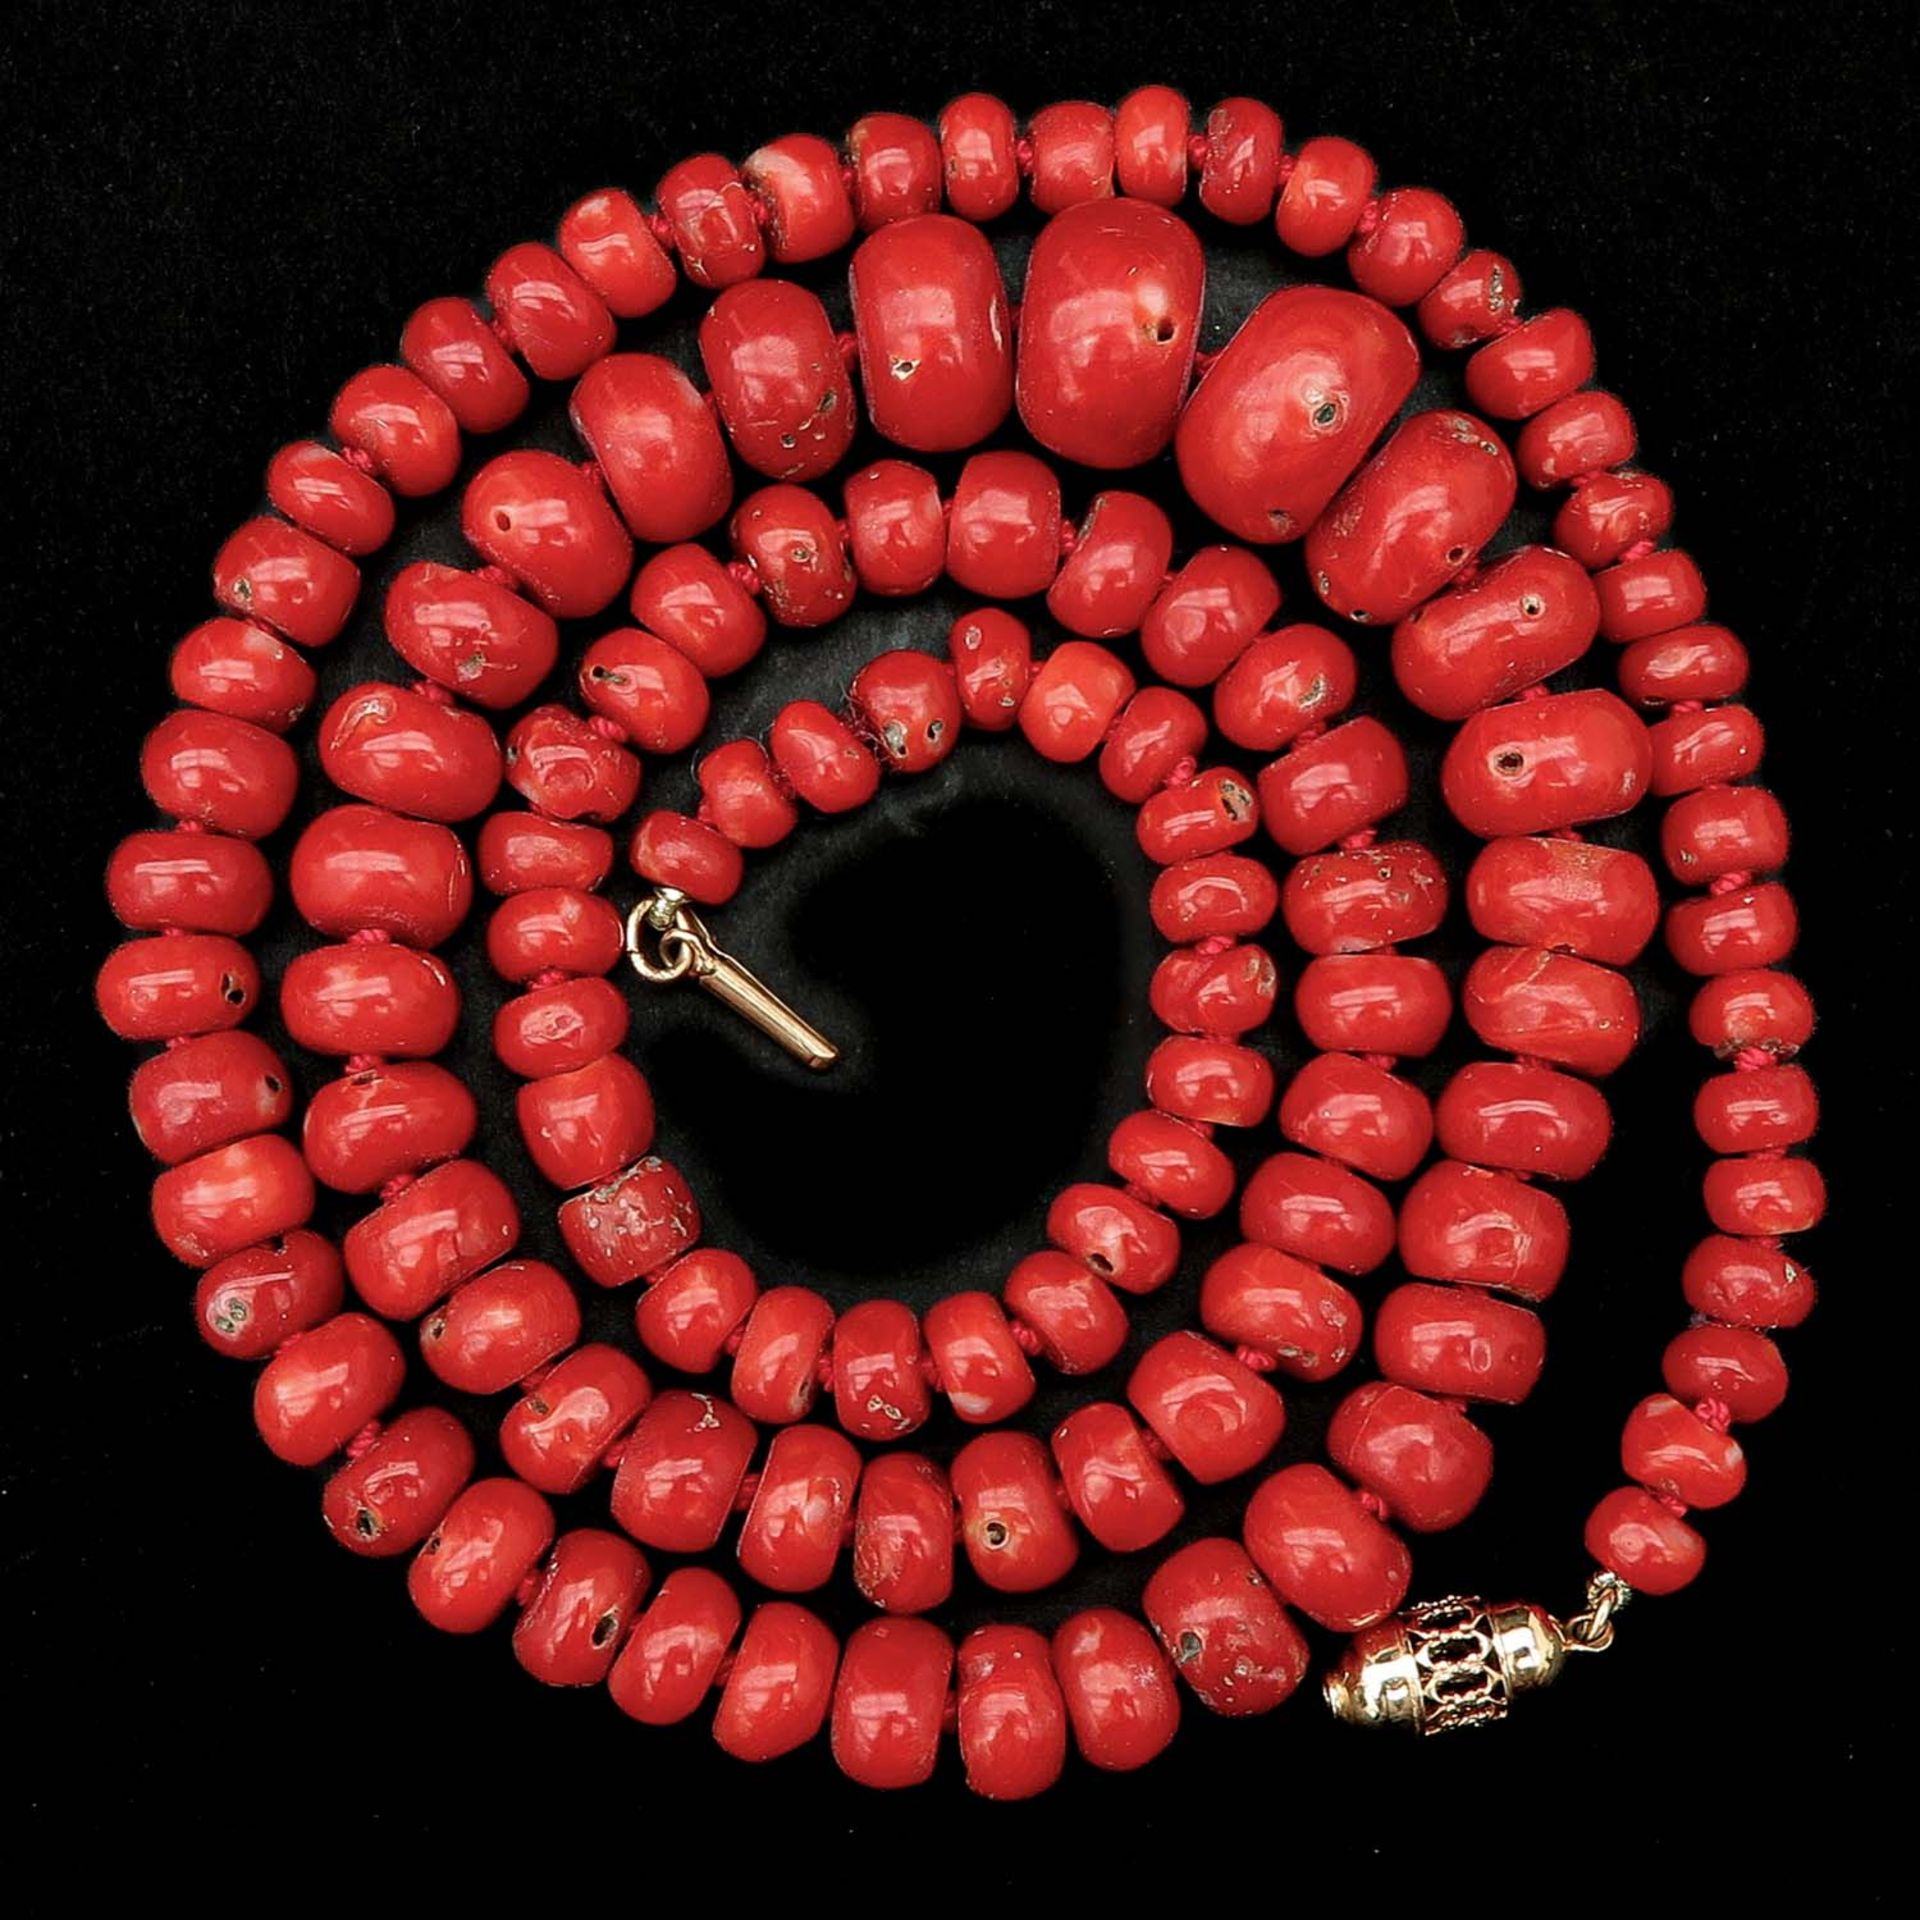 A Single Strand Deep Red Red Coral Necklace - Image 3 of 5